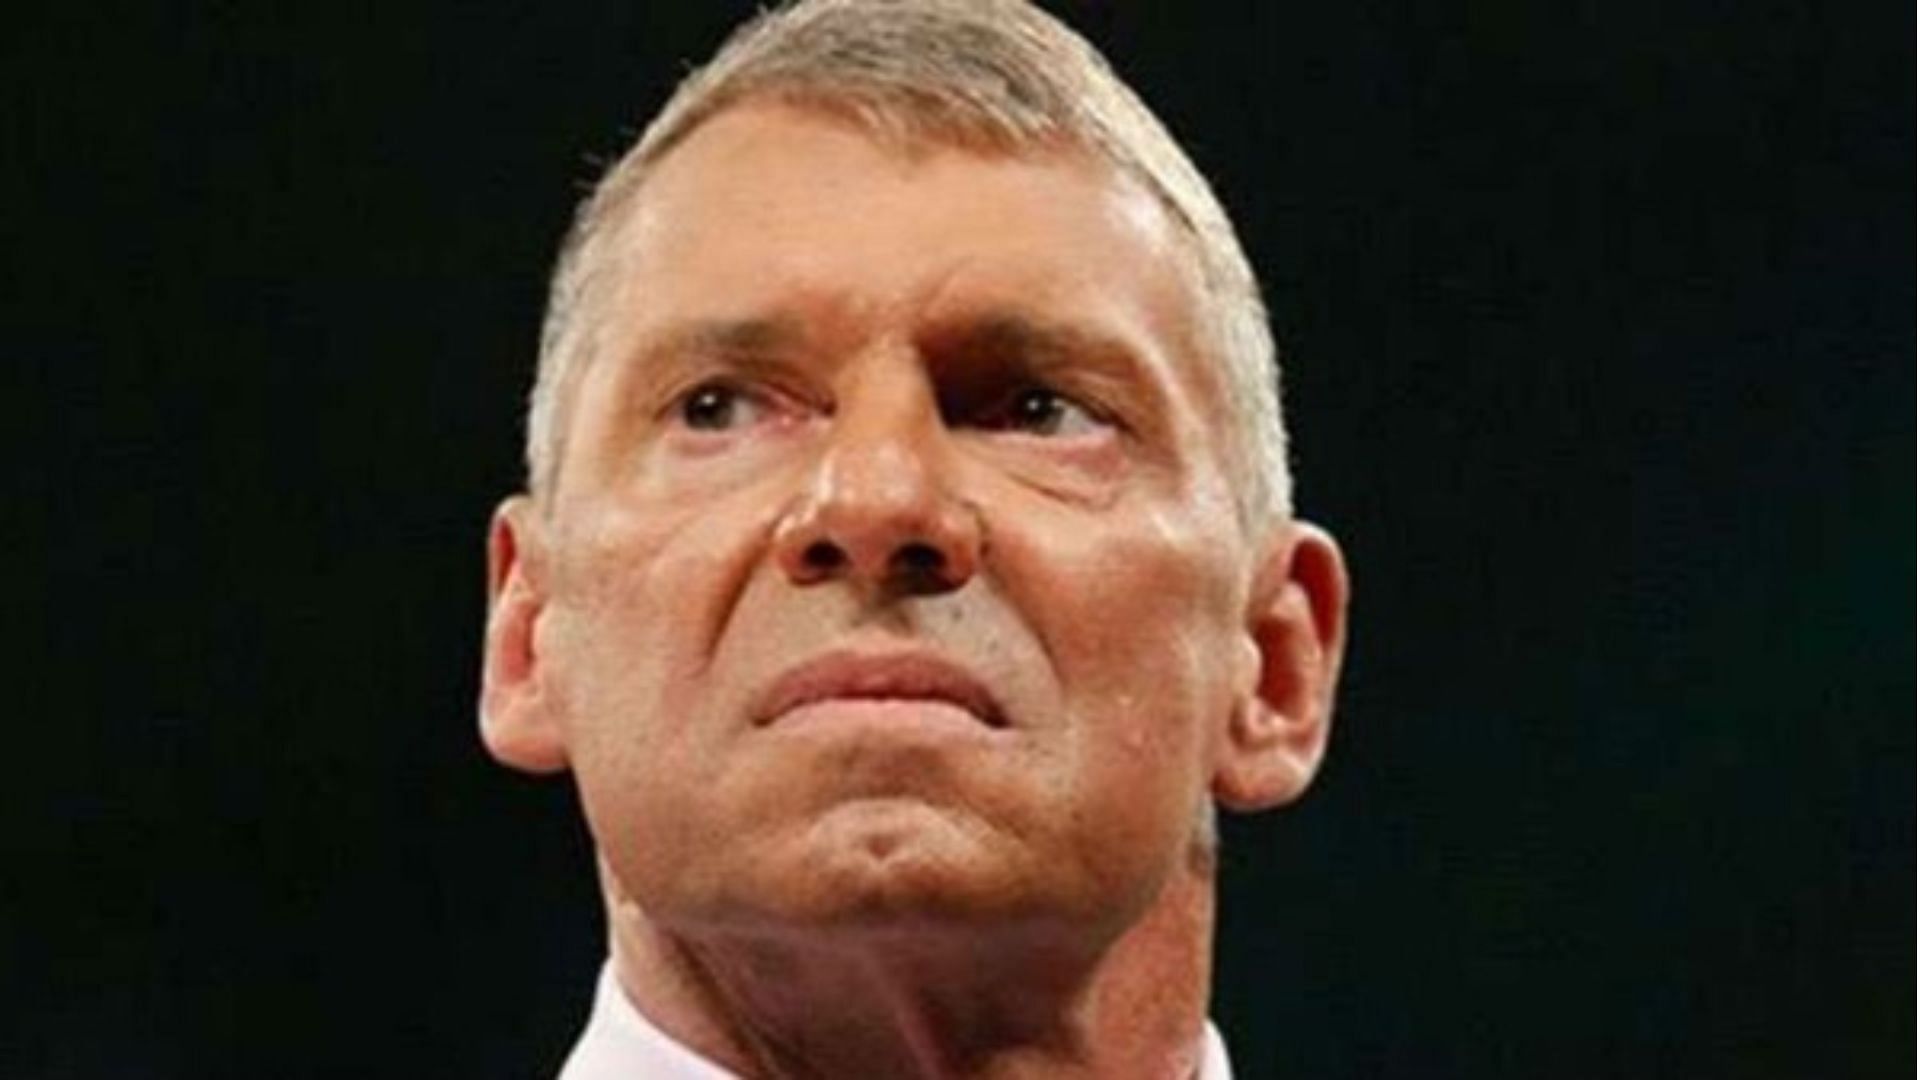 Did Vince McMahon swallow his pride when he brought back this WWE Superstar?